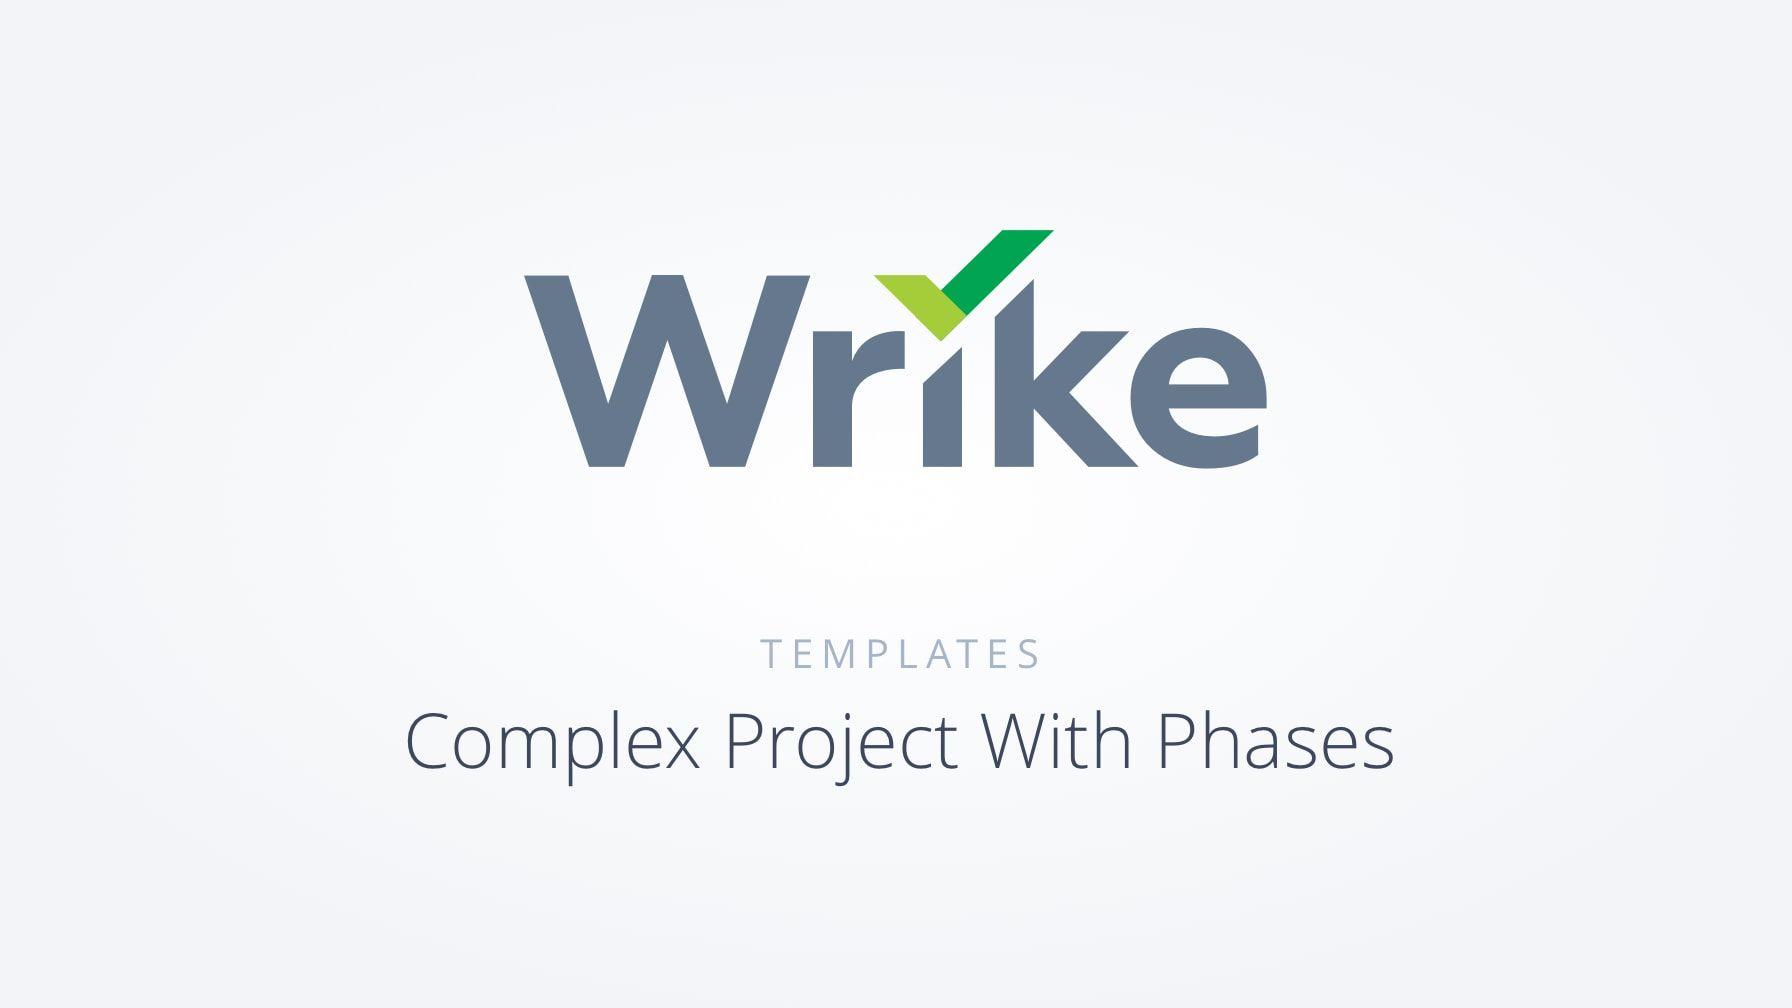 Wrike Logo - Complex Project with Phases. Wrike Templates for Project Management